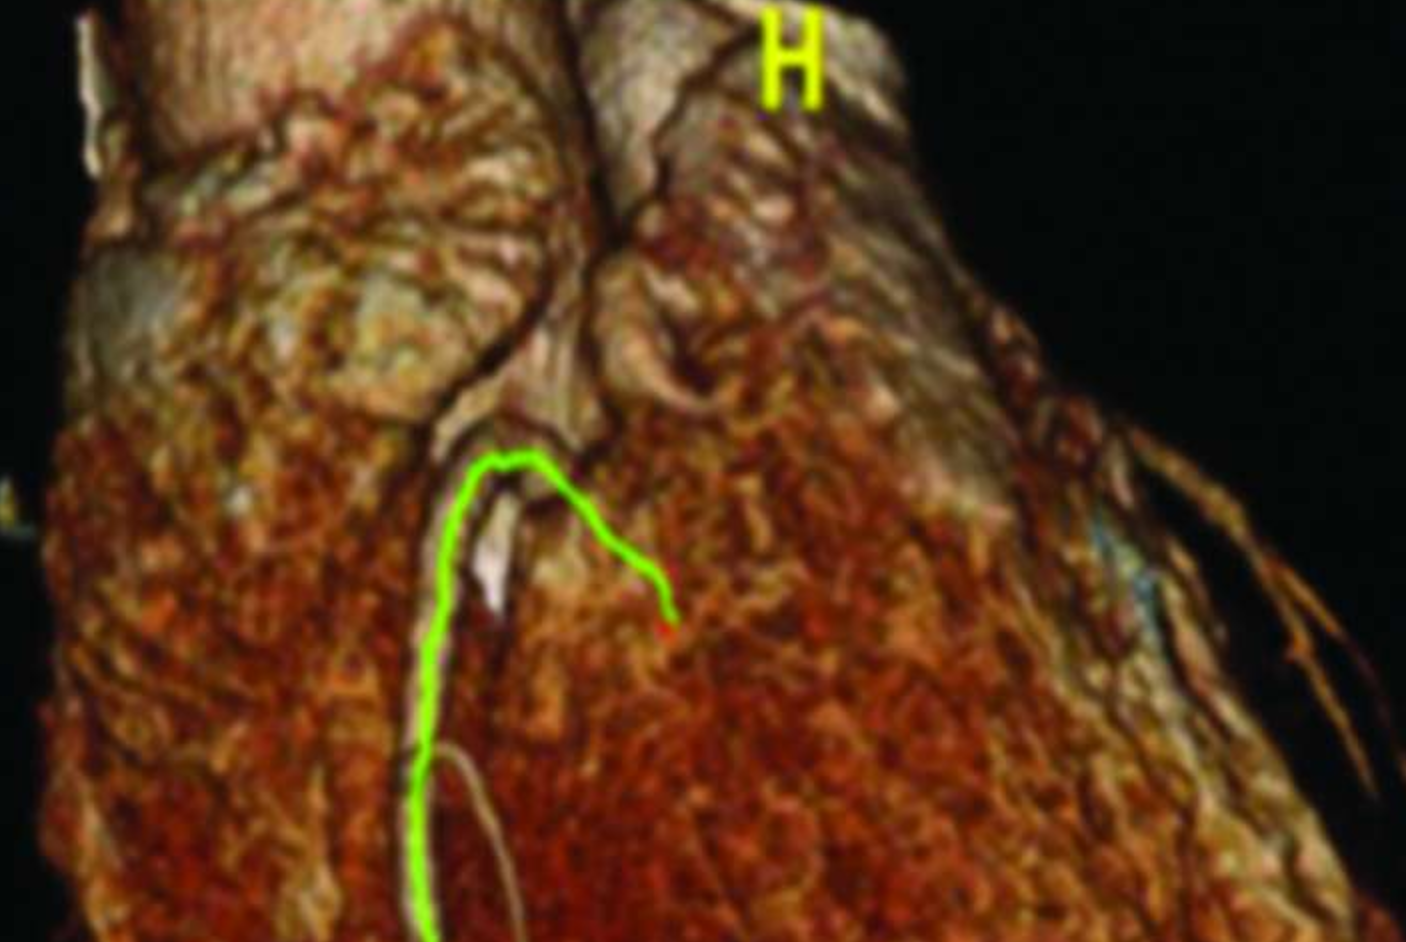 Mapping fat accumlation around coronary artery with a new non-invasive imaging technique